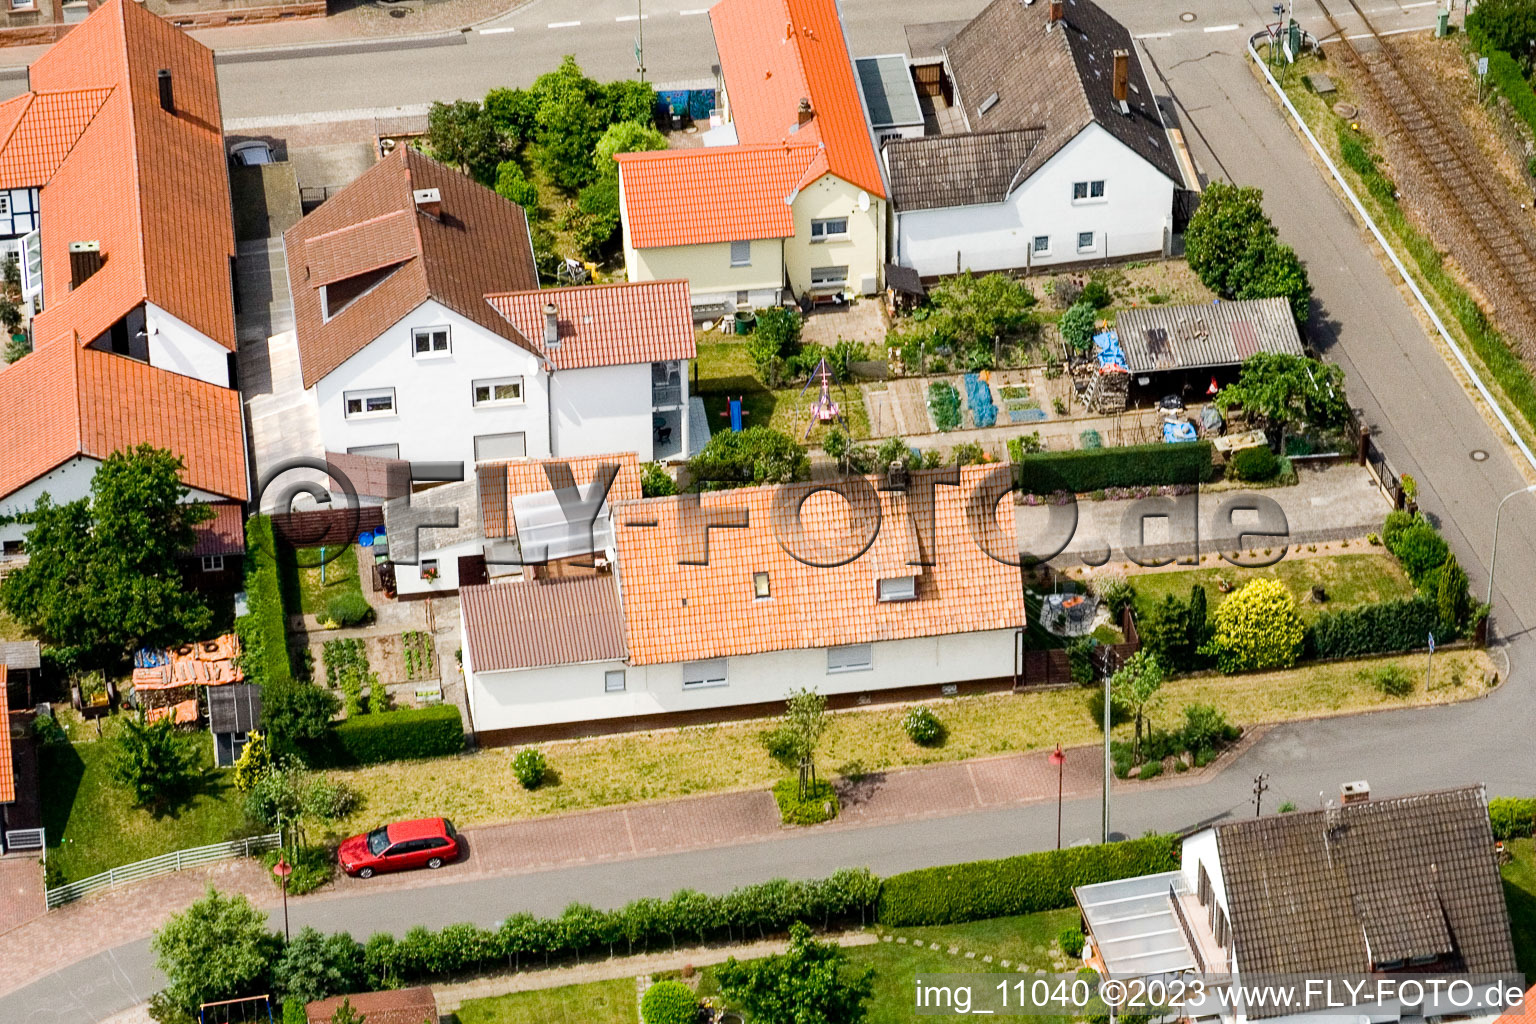 Drone image of Barbelroth in the state Rhineland-Palatinate, Germany